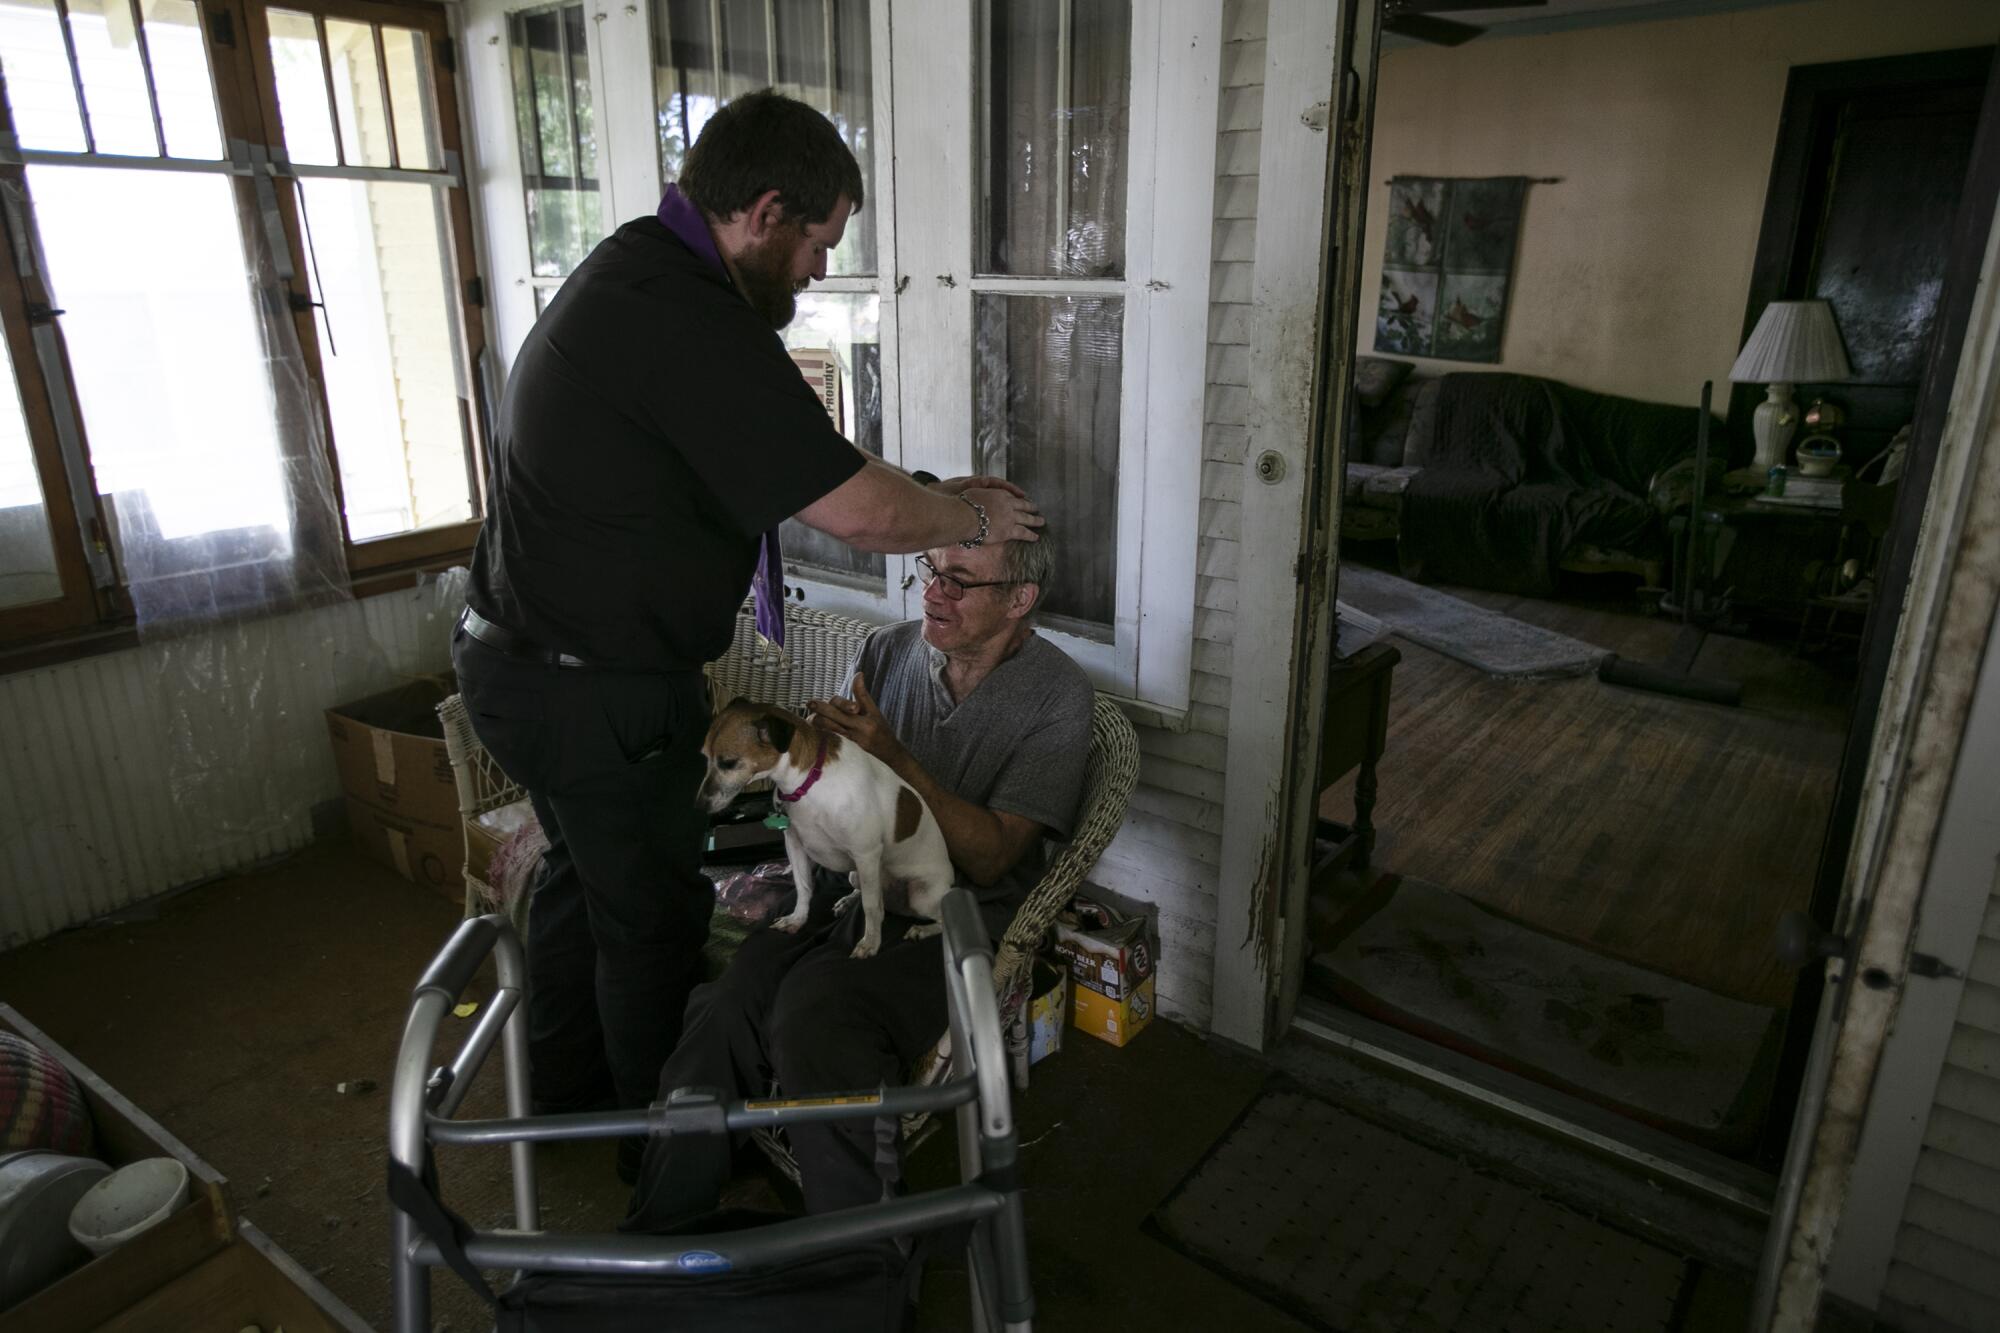 The Rev. Kristopher Cowles blesses Doug Van Loh, 62, at his home as his dog Sadie stands by.